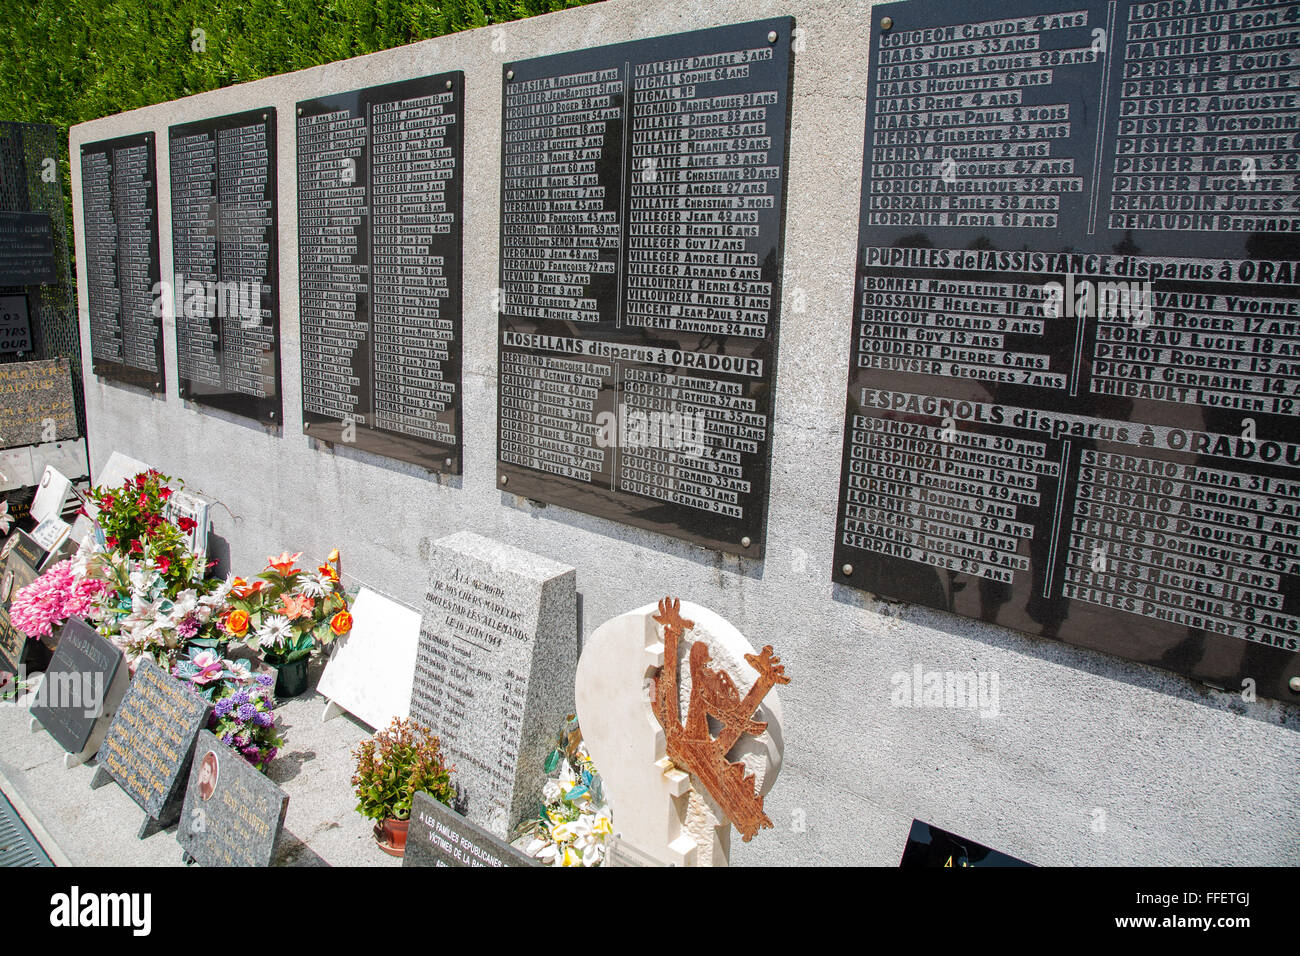 Memorial to the massacred dead at the village of Oradour sur Glane, Haute Vienne, France Stock Photo